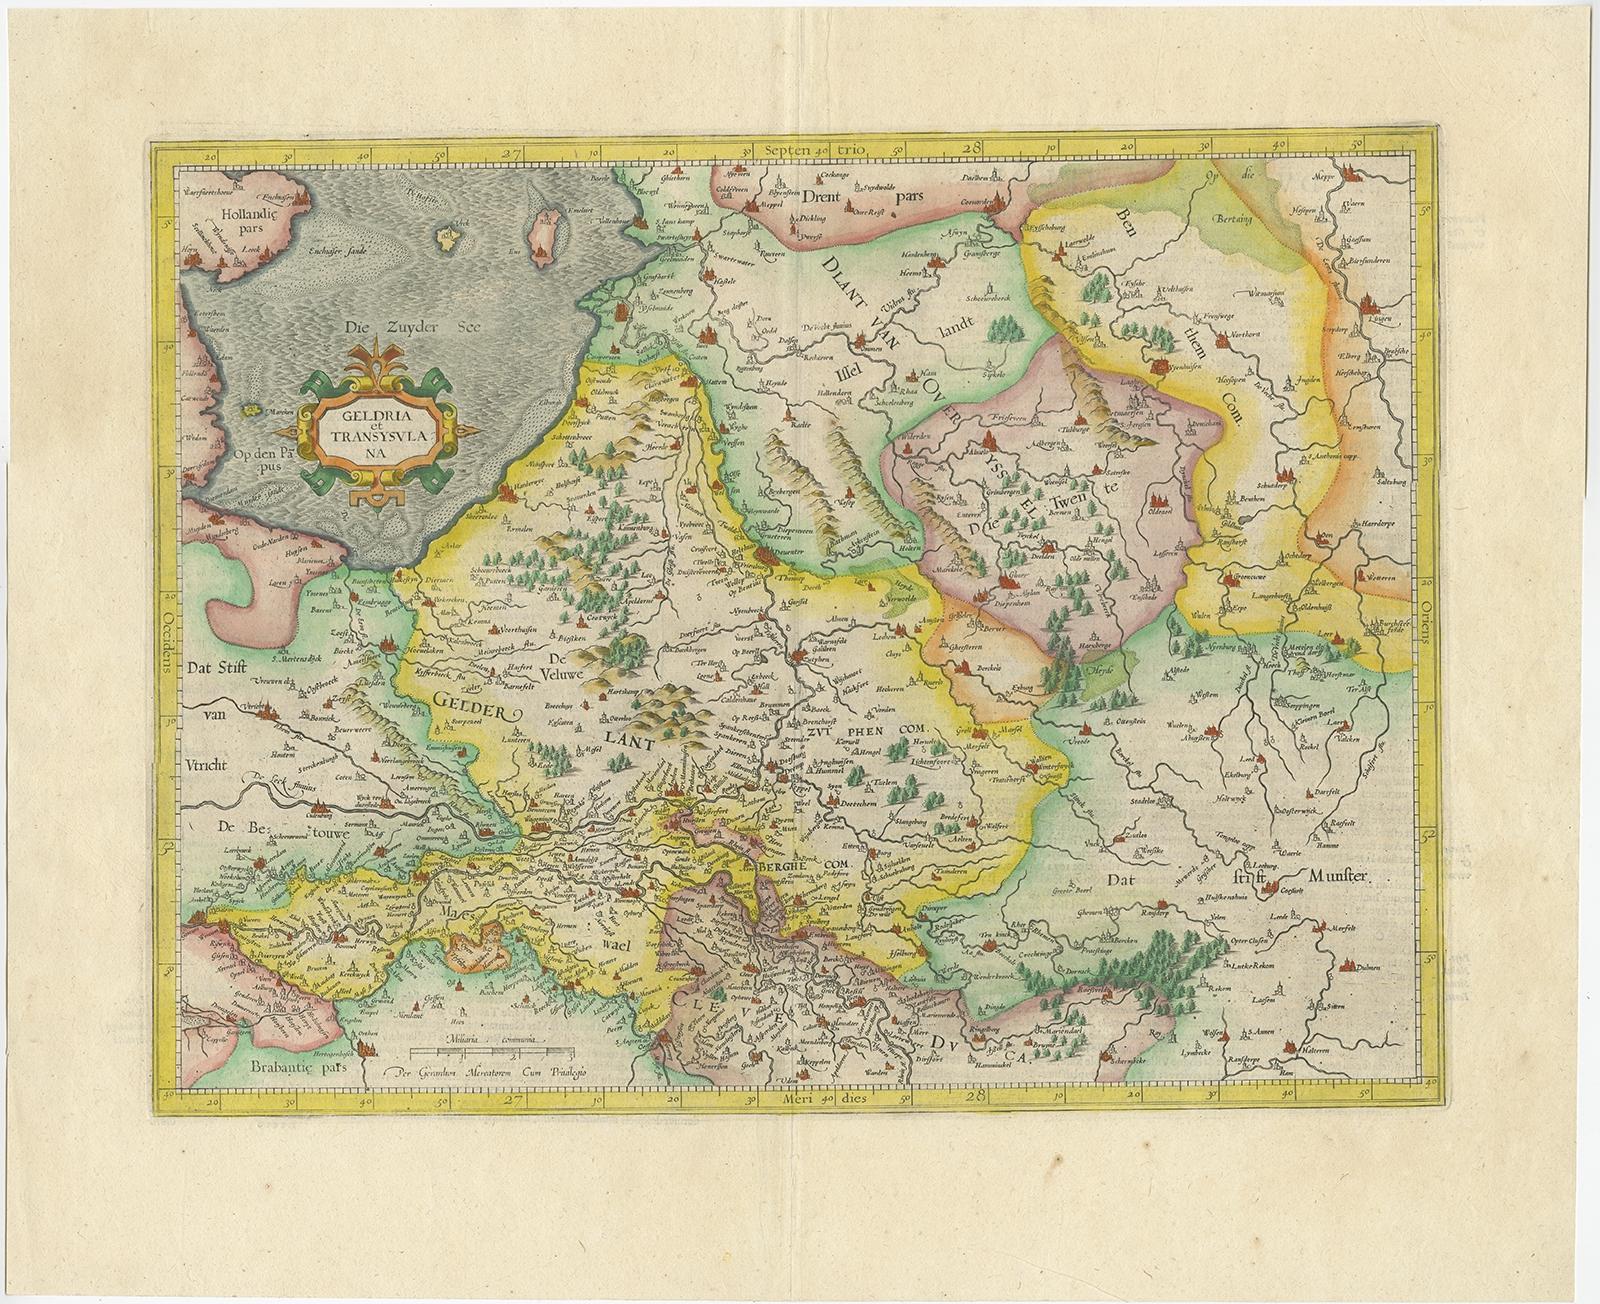 Antique map titled 'Geldria et Transysulana'. 

One of the earliest maps of Gelderland and Overijssel in the Netherlands, prepared by Gerard Mercator.

Artists and Engravers: Gerard Mercator (Kremer) was born in Rupelmonde in Flanders and